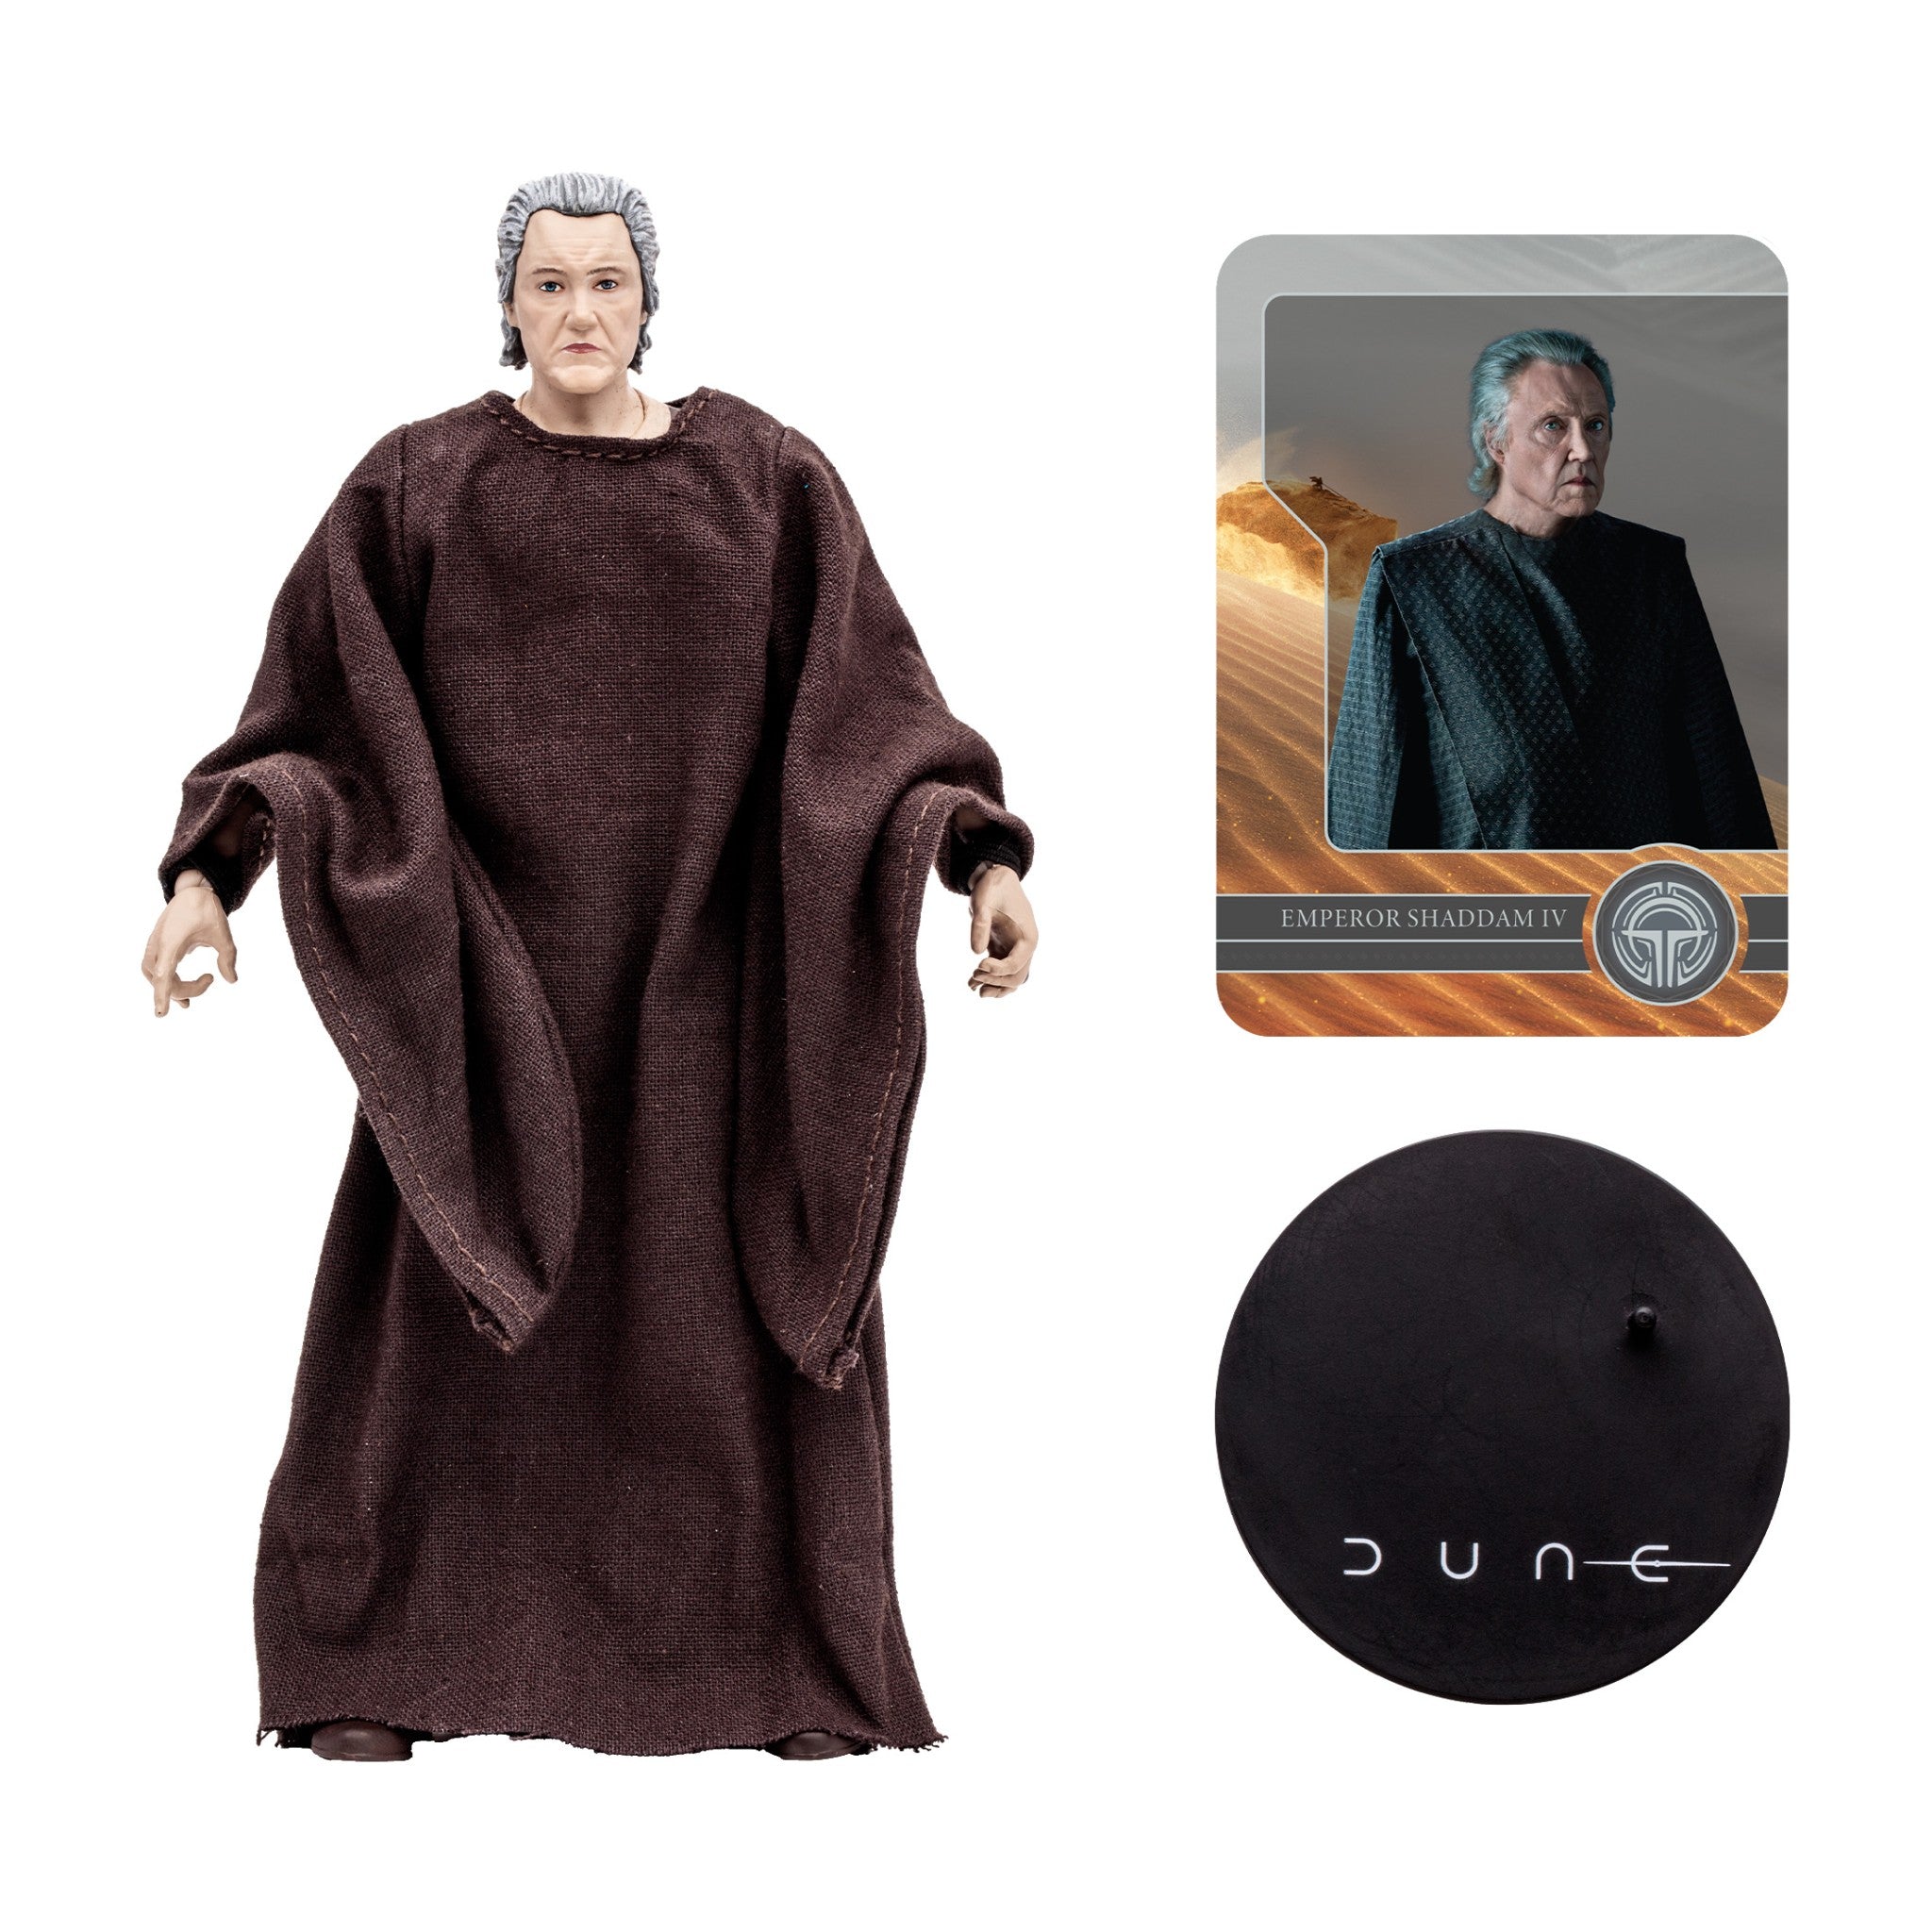 Dune Movie Part Two 2 Emperor Shaddam IV 7" Action Figure - McFarlane Toys - 0